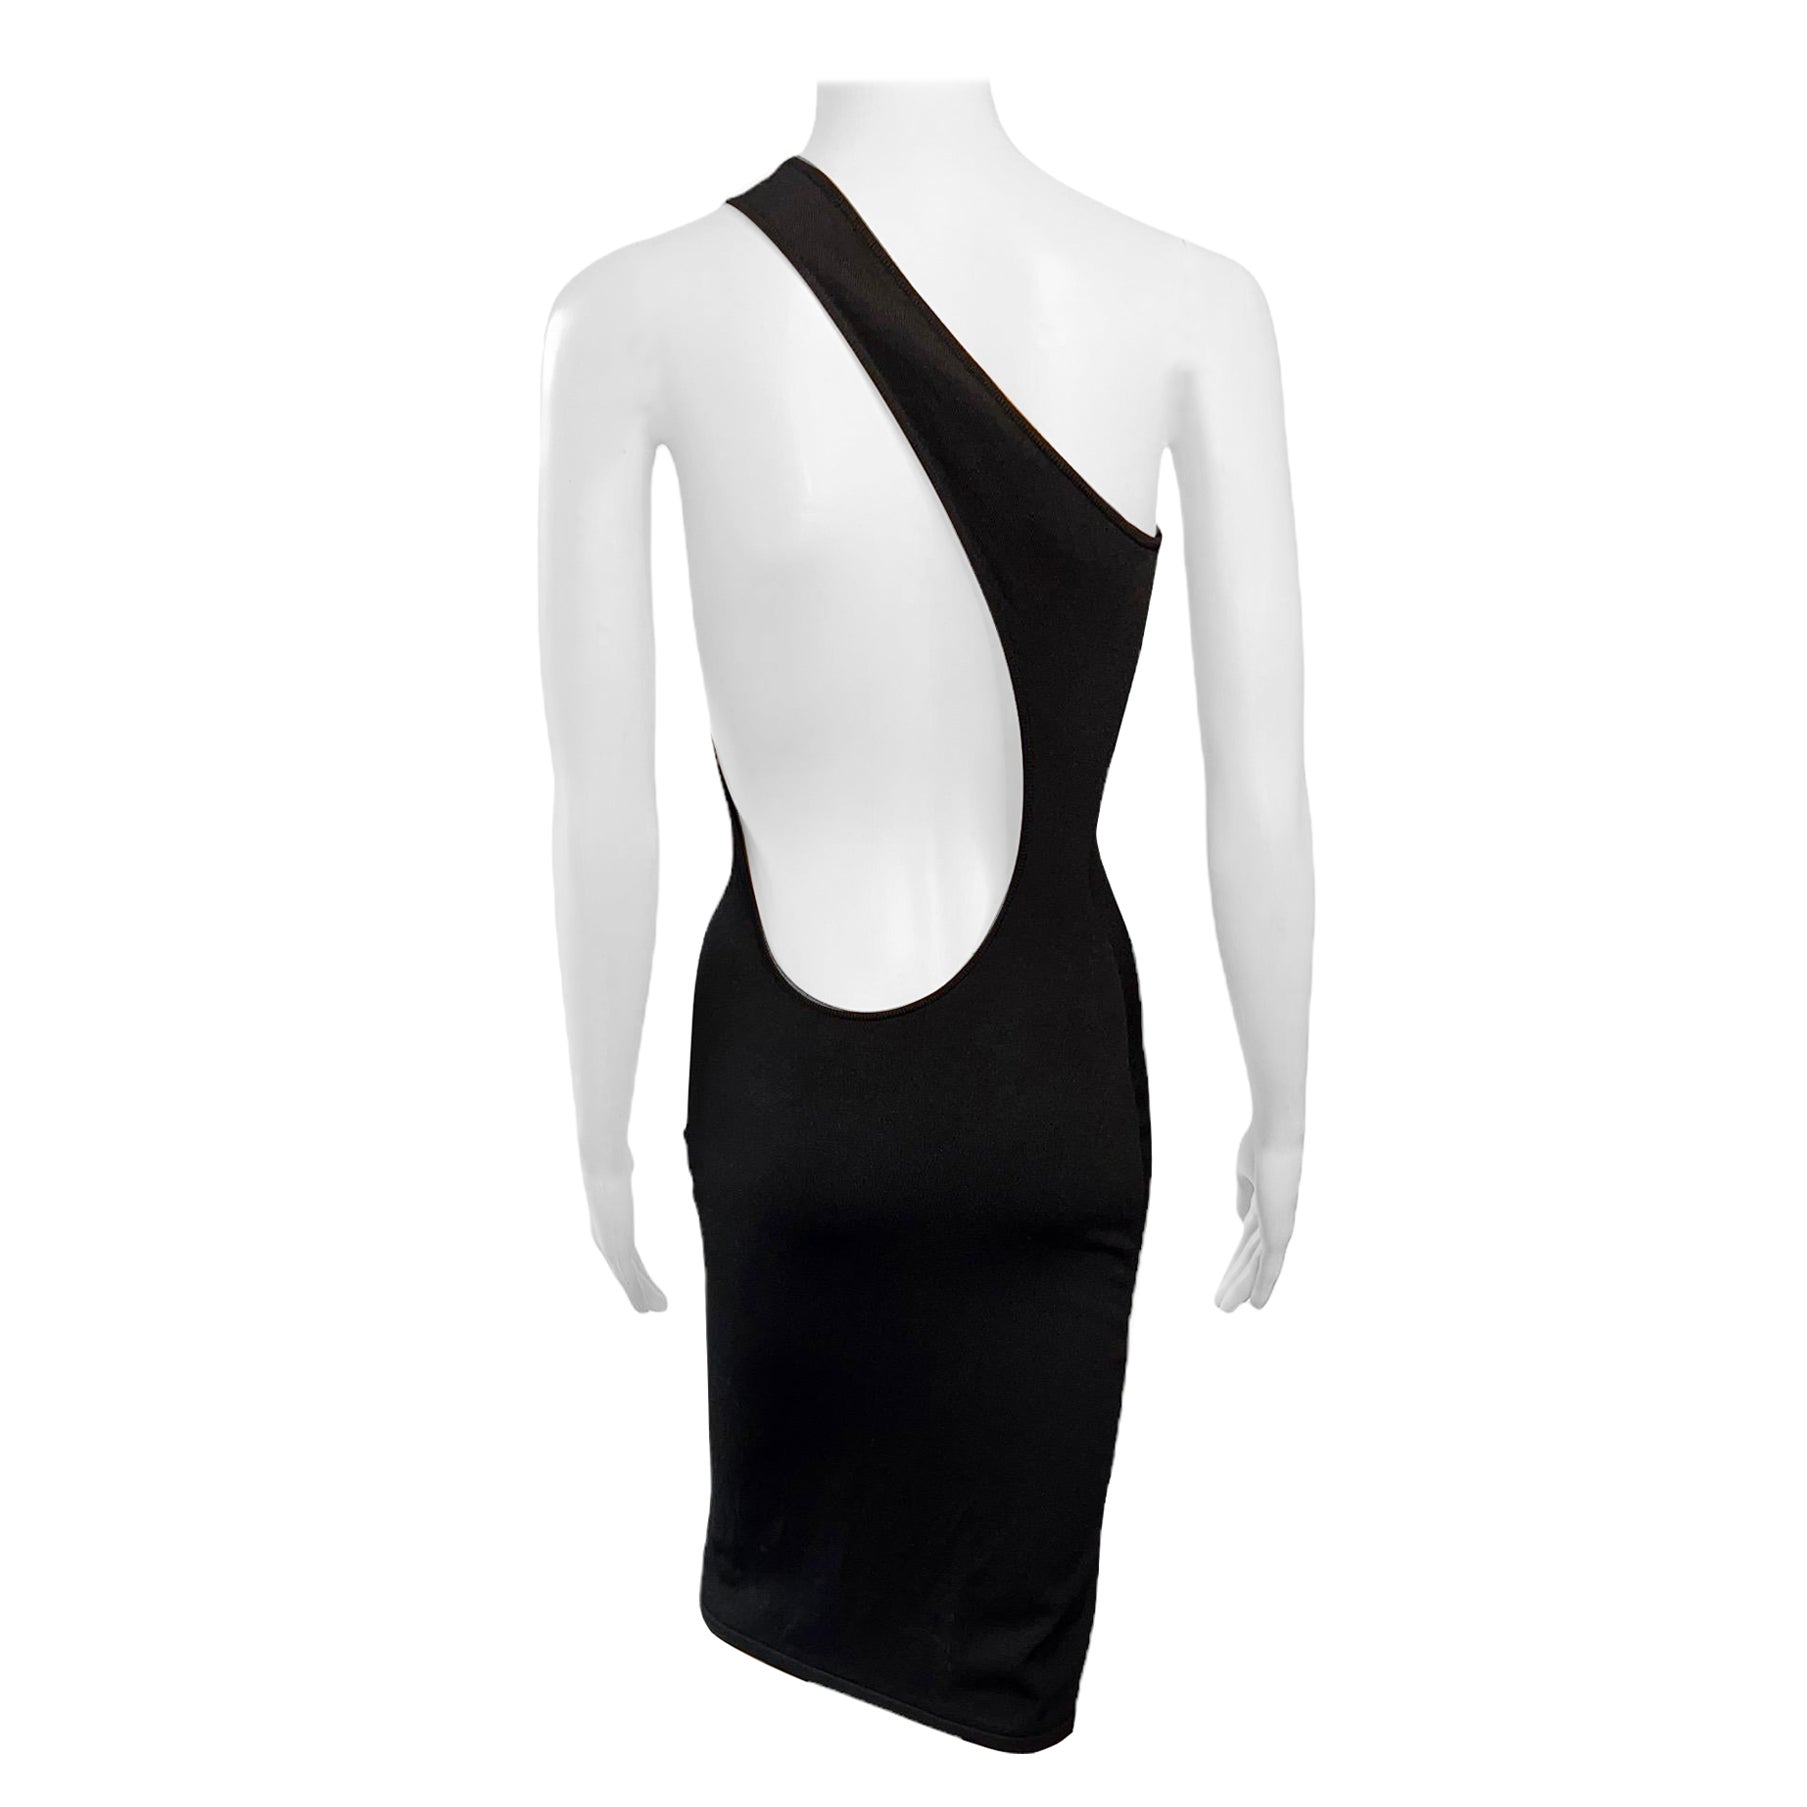 Tom Ford for Gucci S/S 2000 Cutout Bodycon Knit Black Dress For Sale